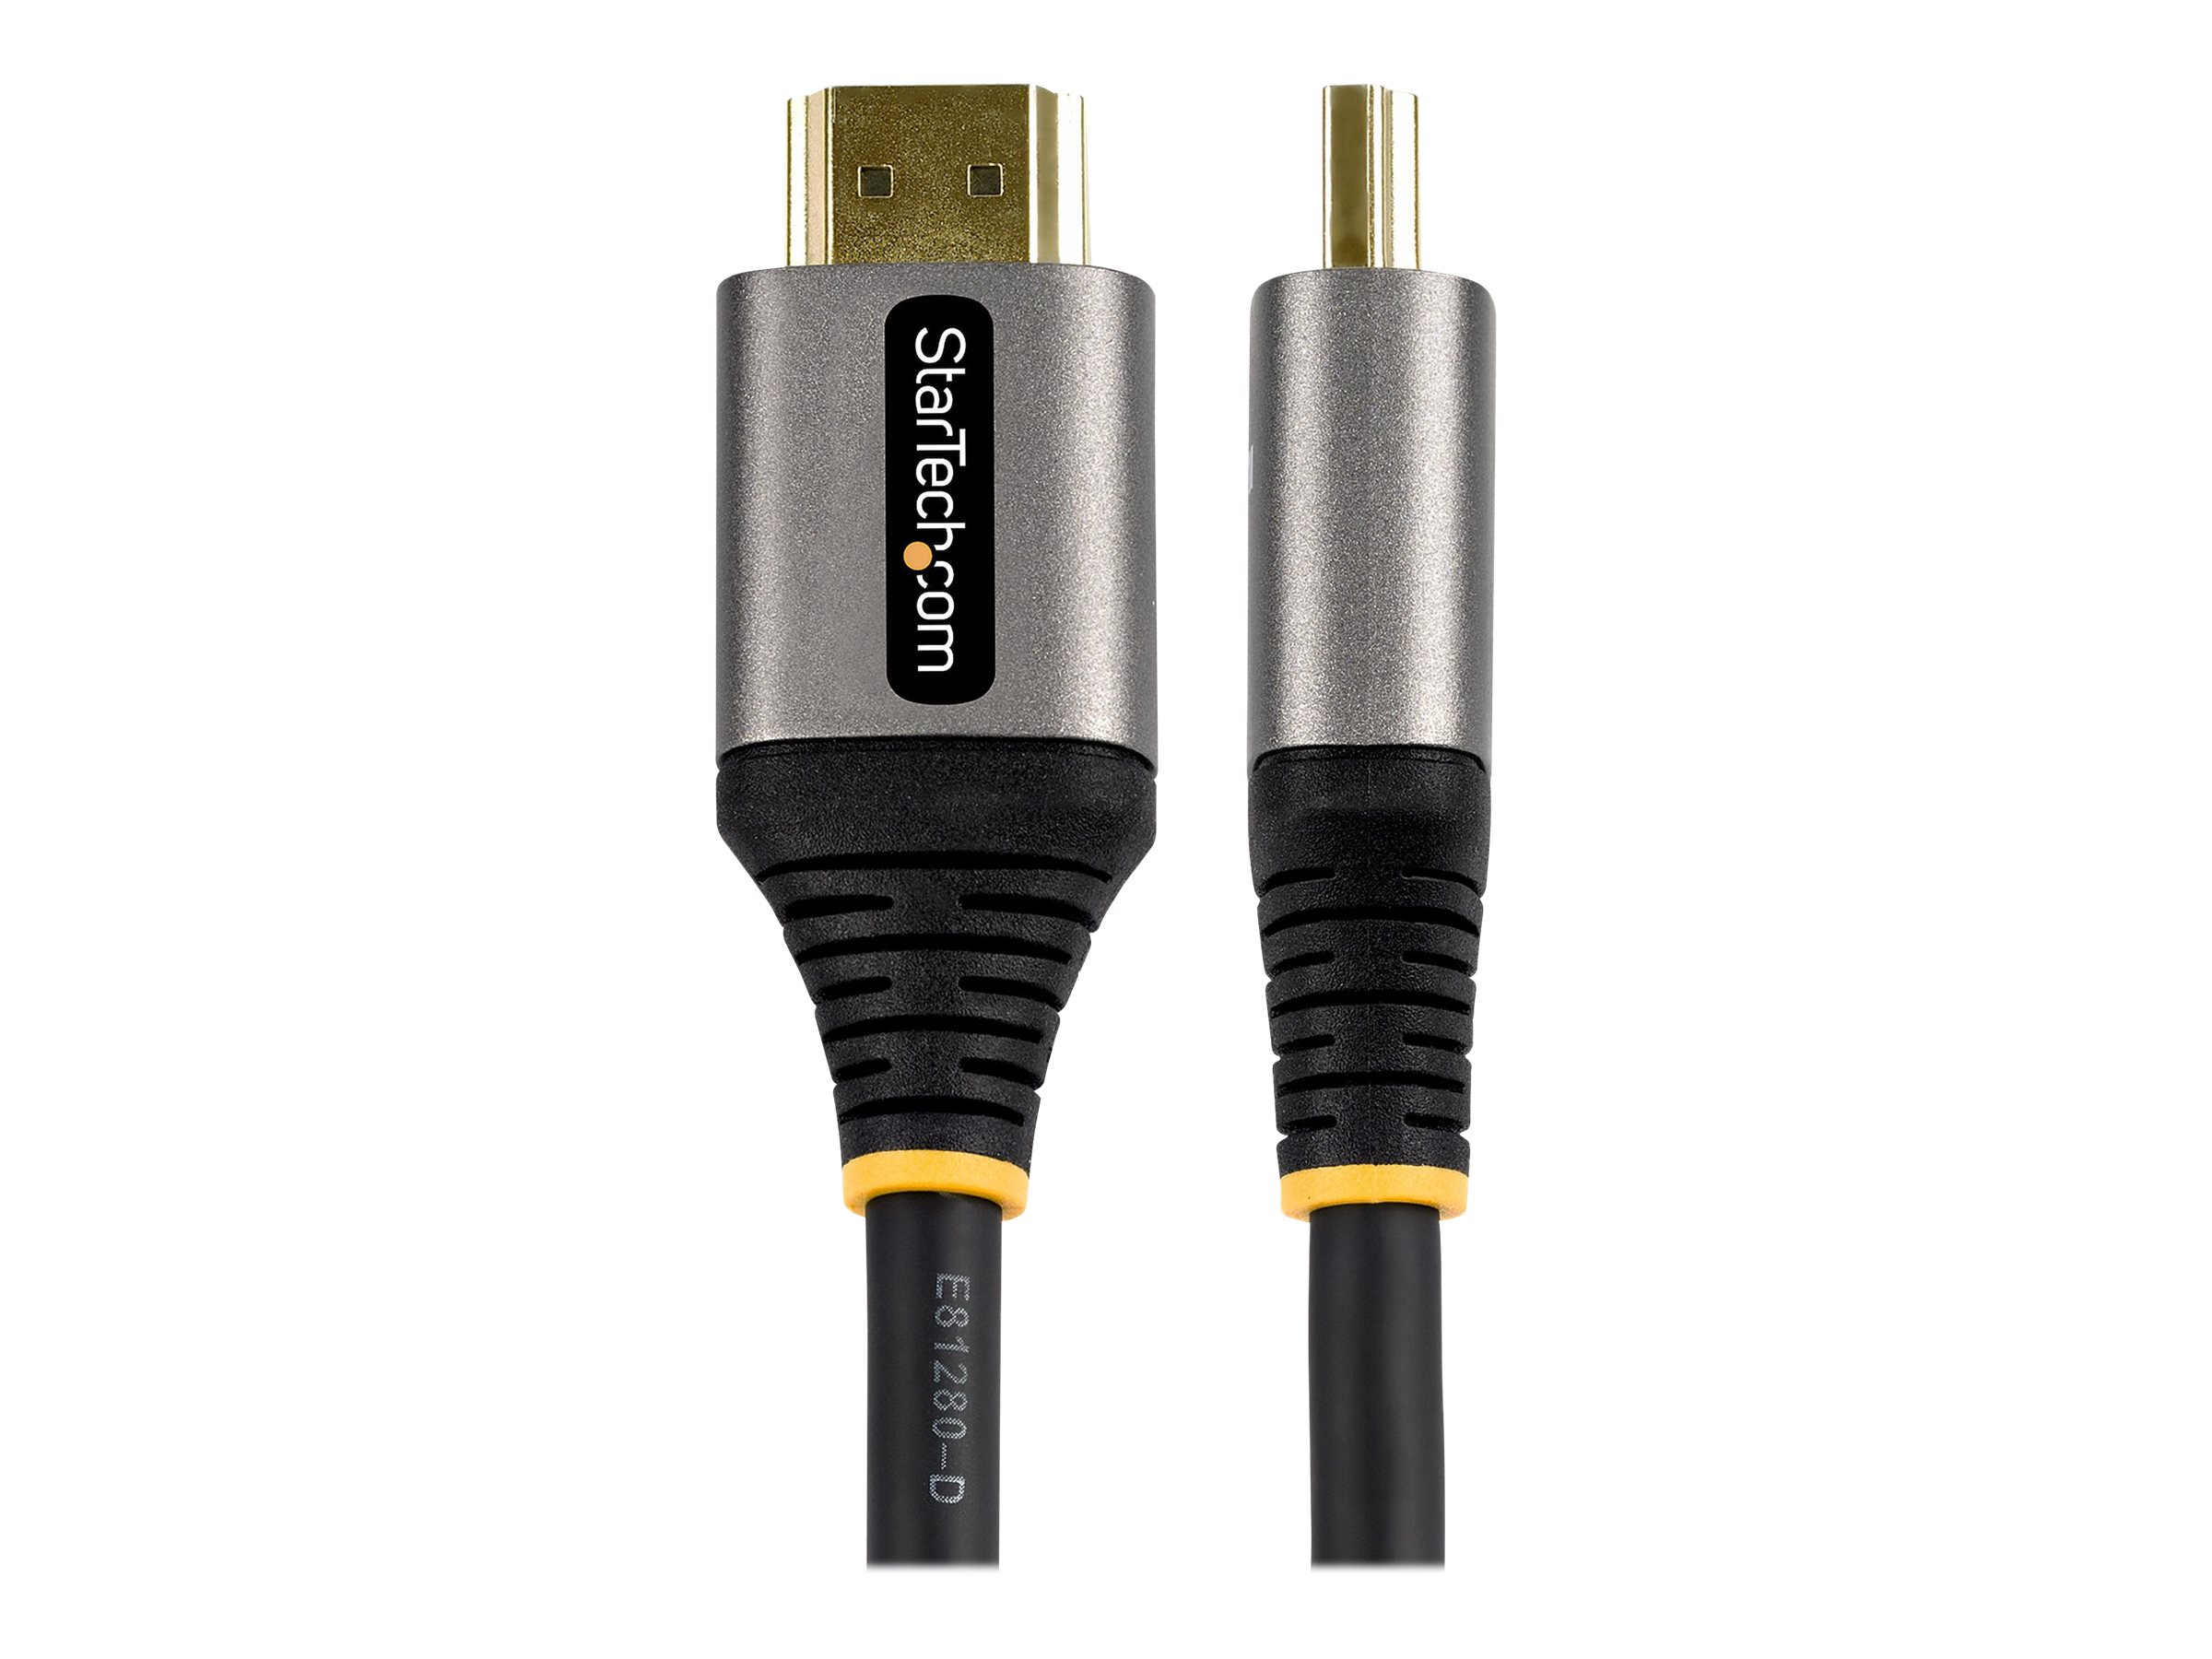  StarTech.com 10ft (3m) HDMI Cable - 4K High Speed HDMI